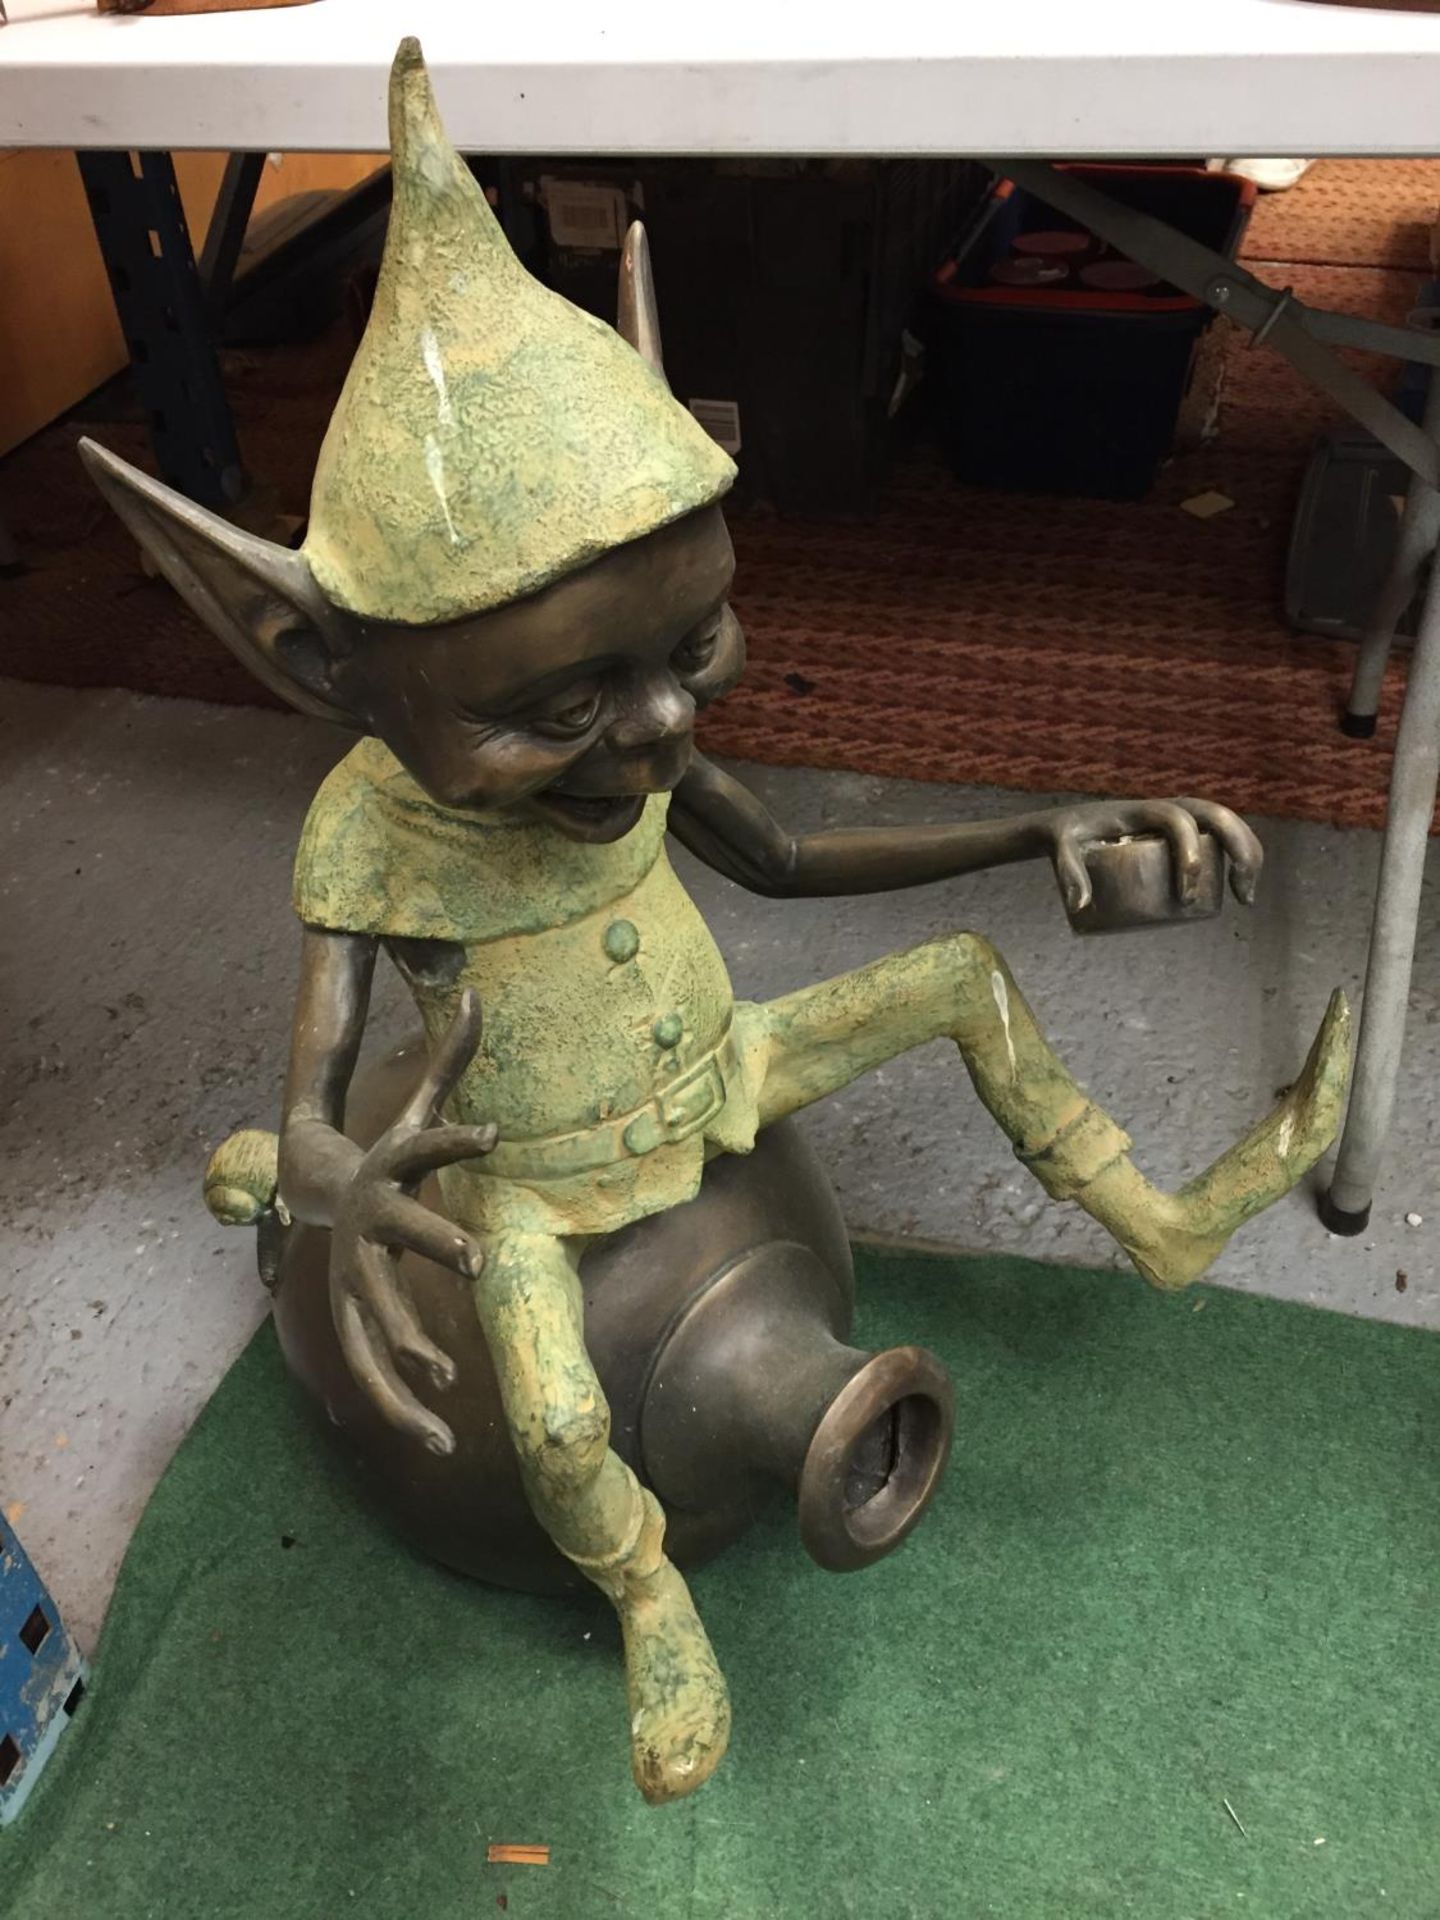 A LARGE BRONZE FIGURE OF A PIXIE - Image 2 of 4